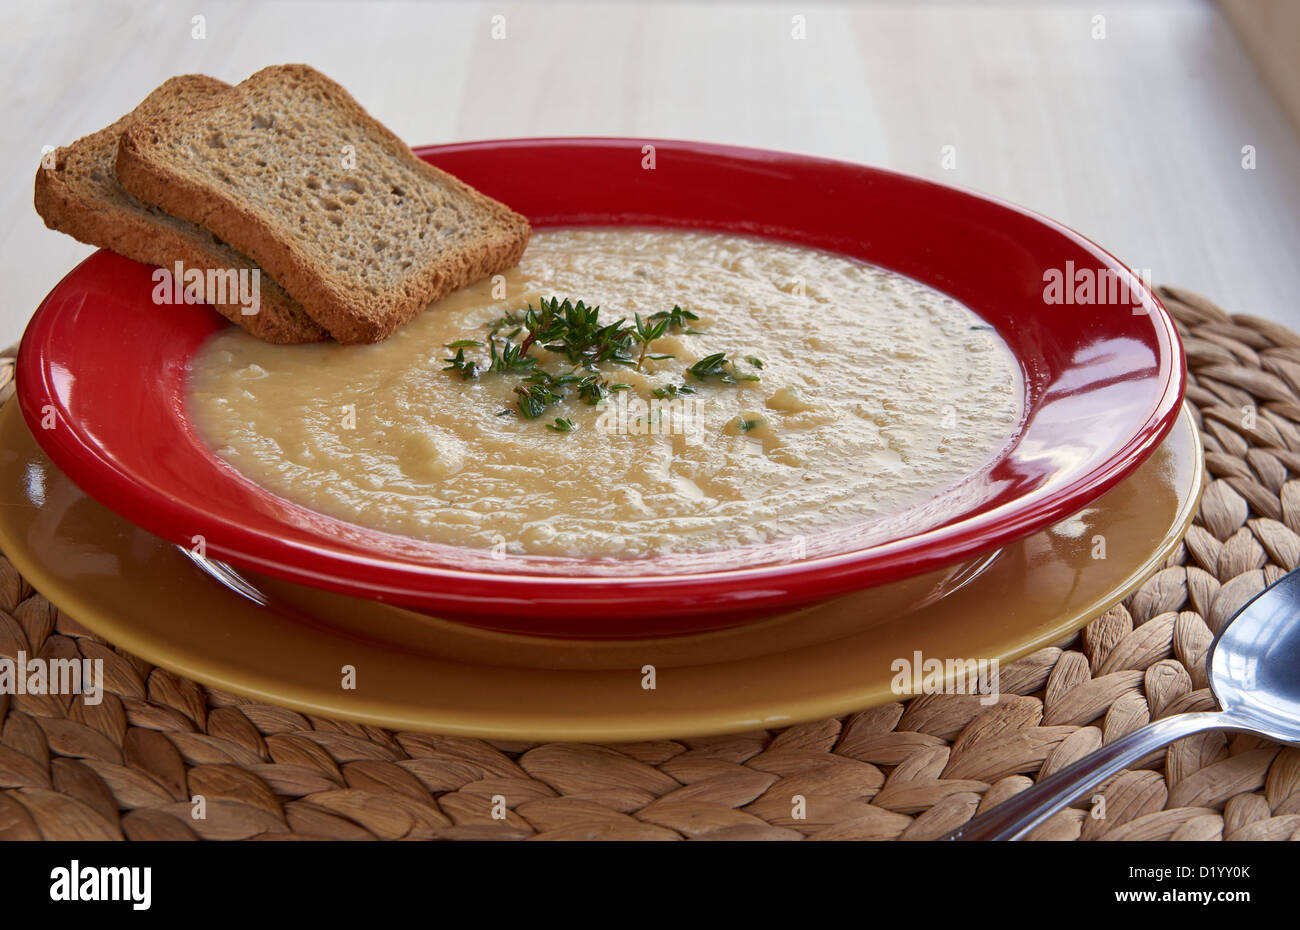 Hot cream of celeriac soup in a red plate on the table with croutons. Best for autumn cold. Stock Photo